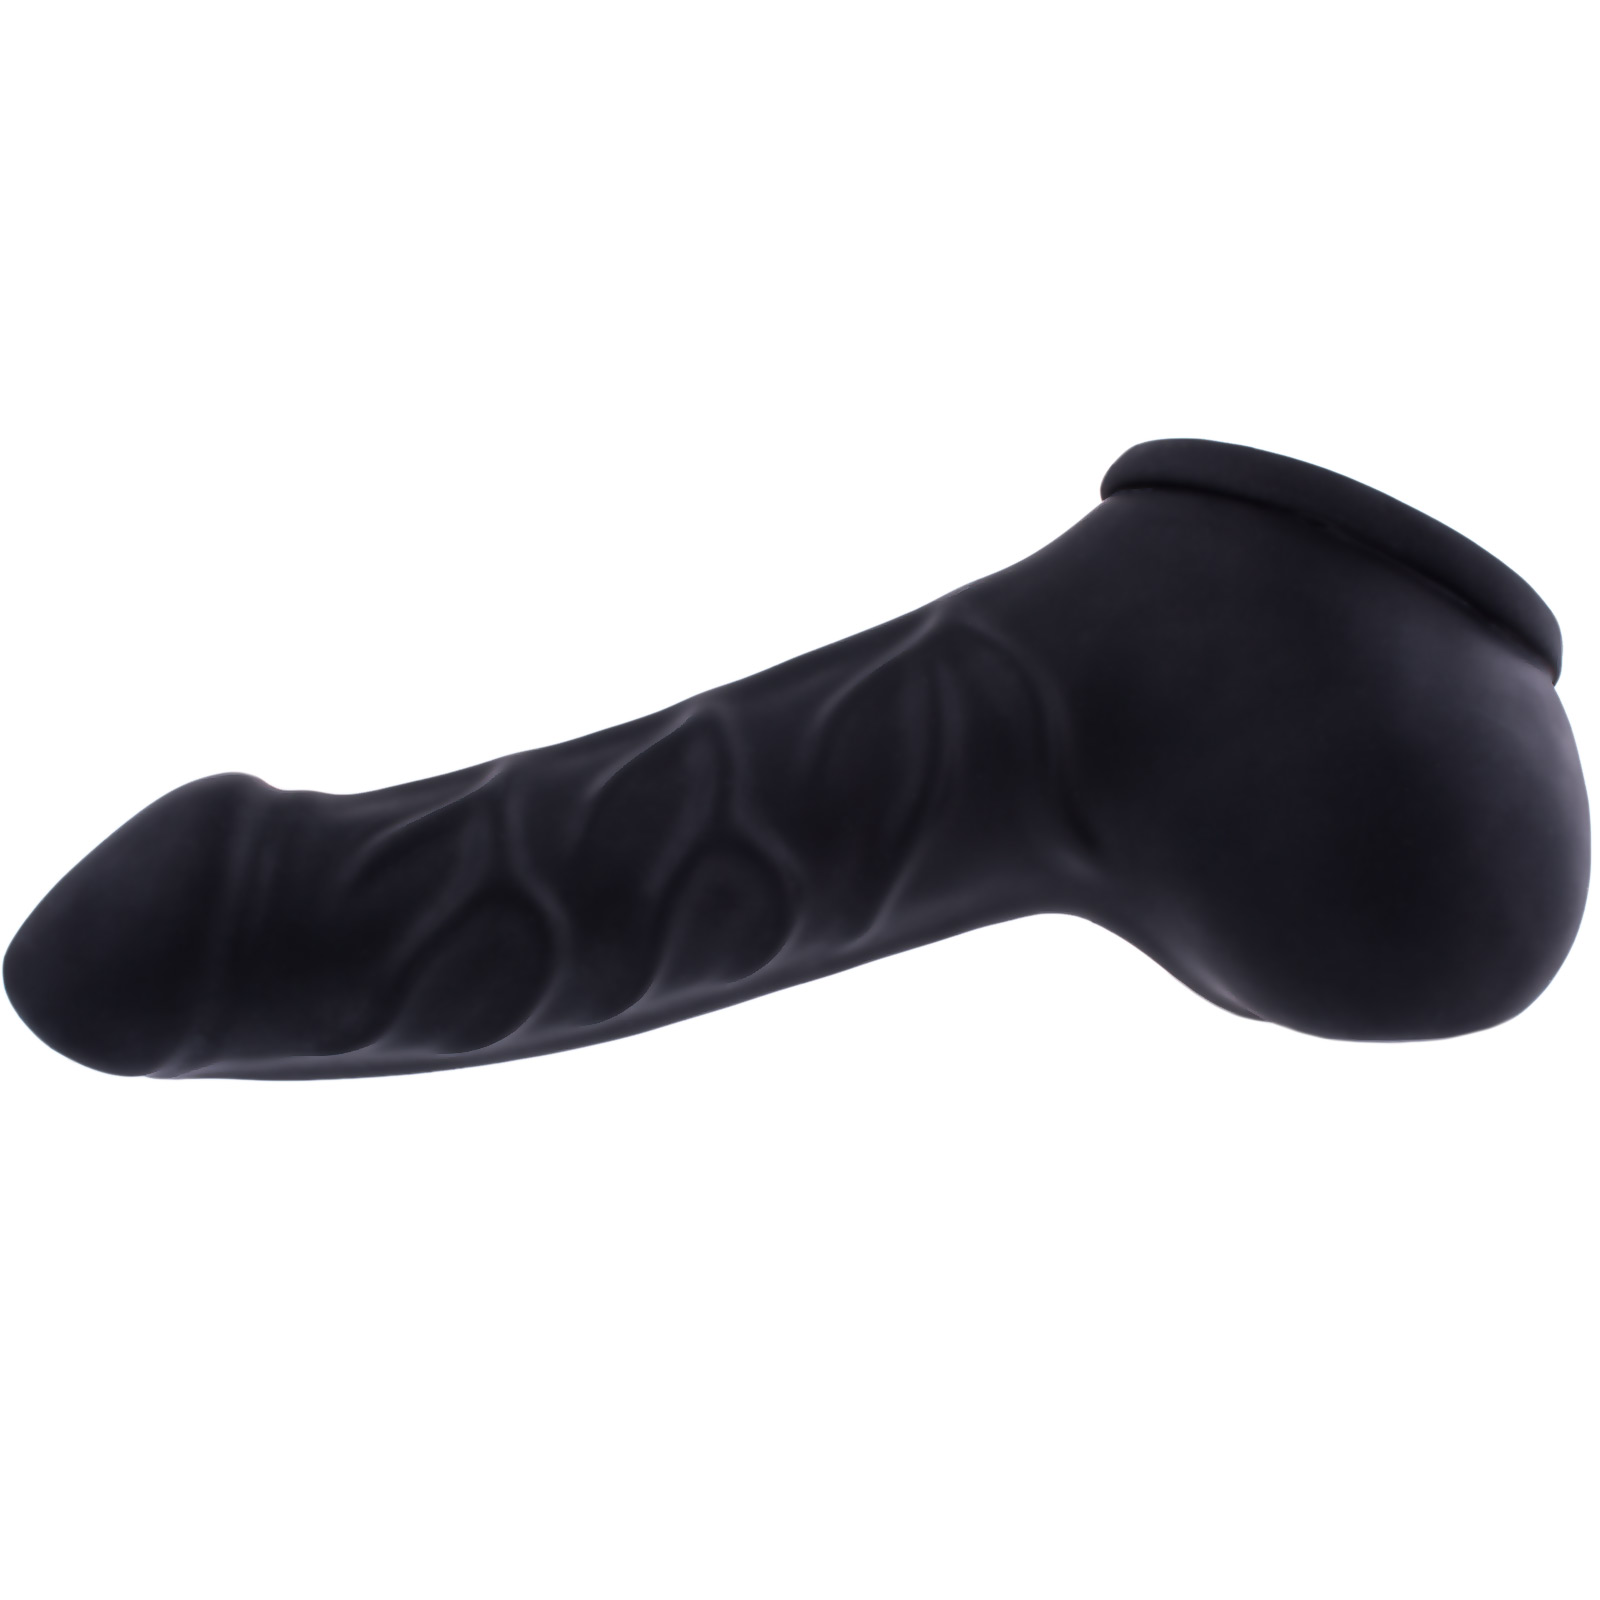 Toylie Latex Penis Sleeve «FRANZ» black, with strong veins and molded scrotum - suitable for vegans